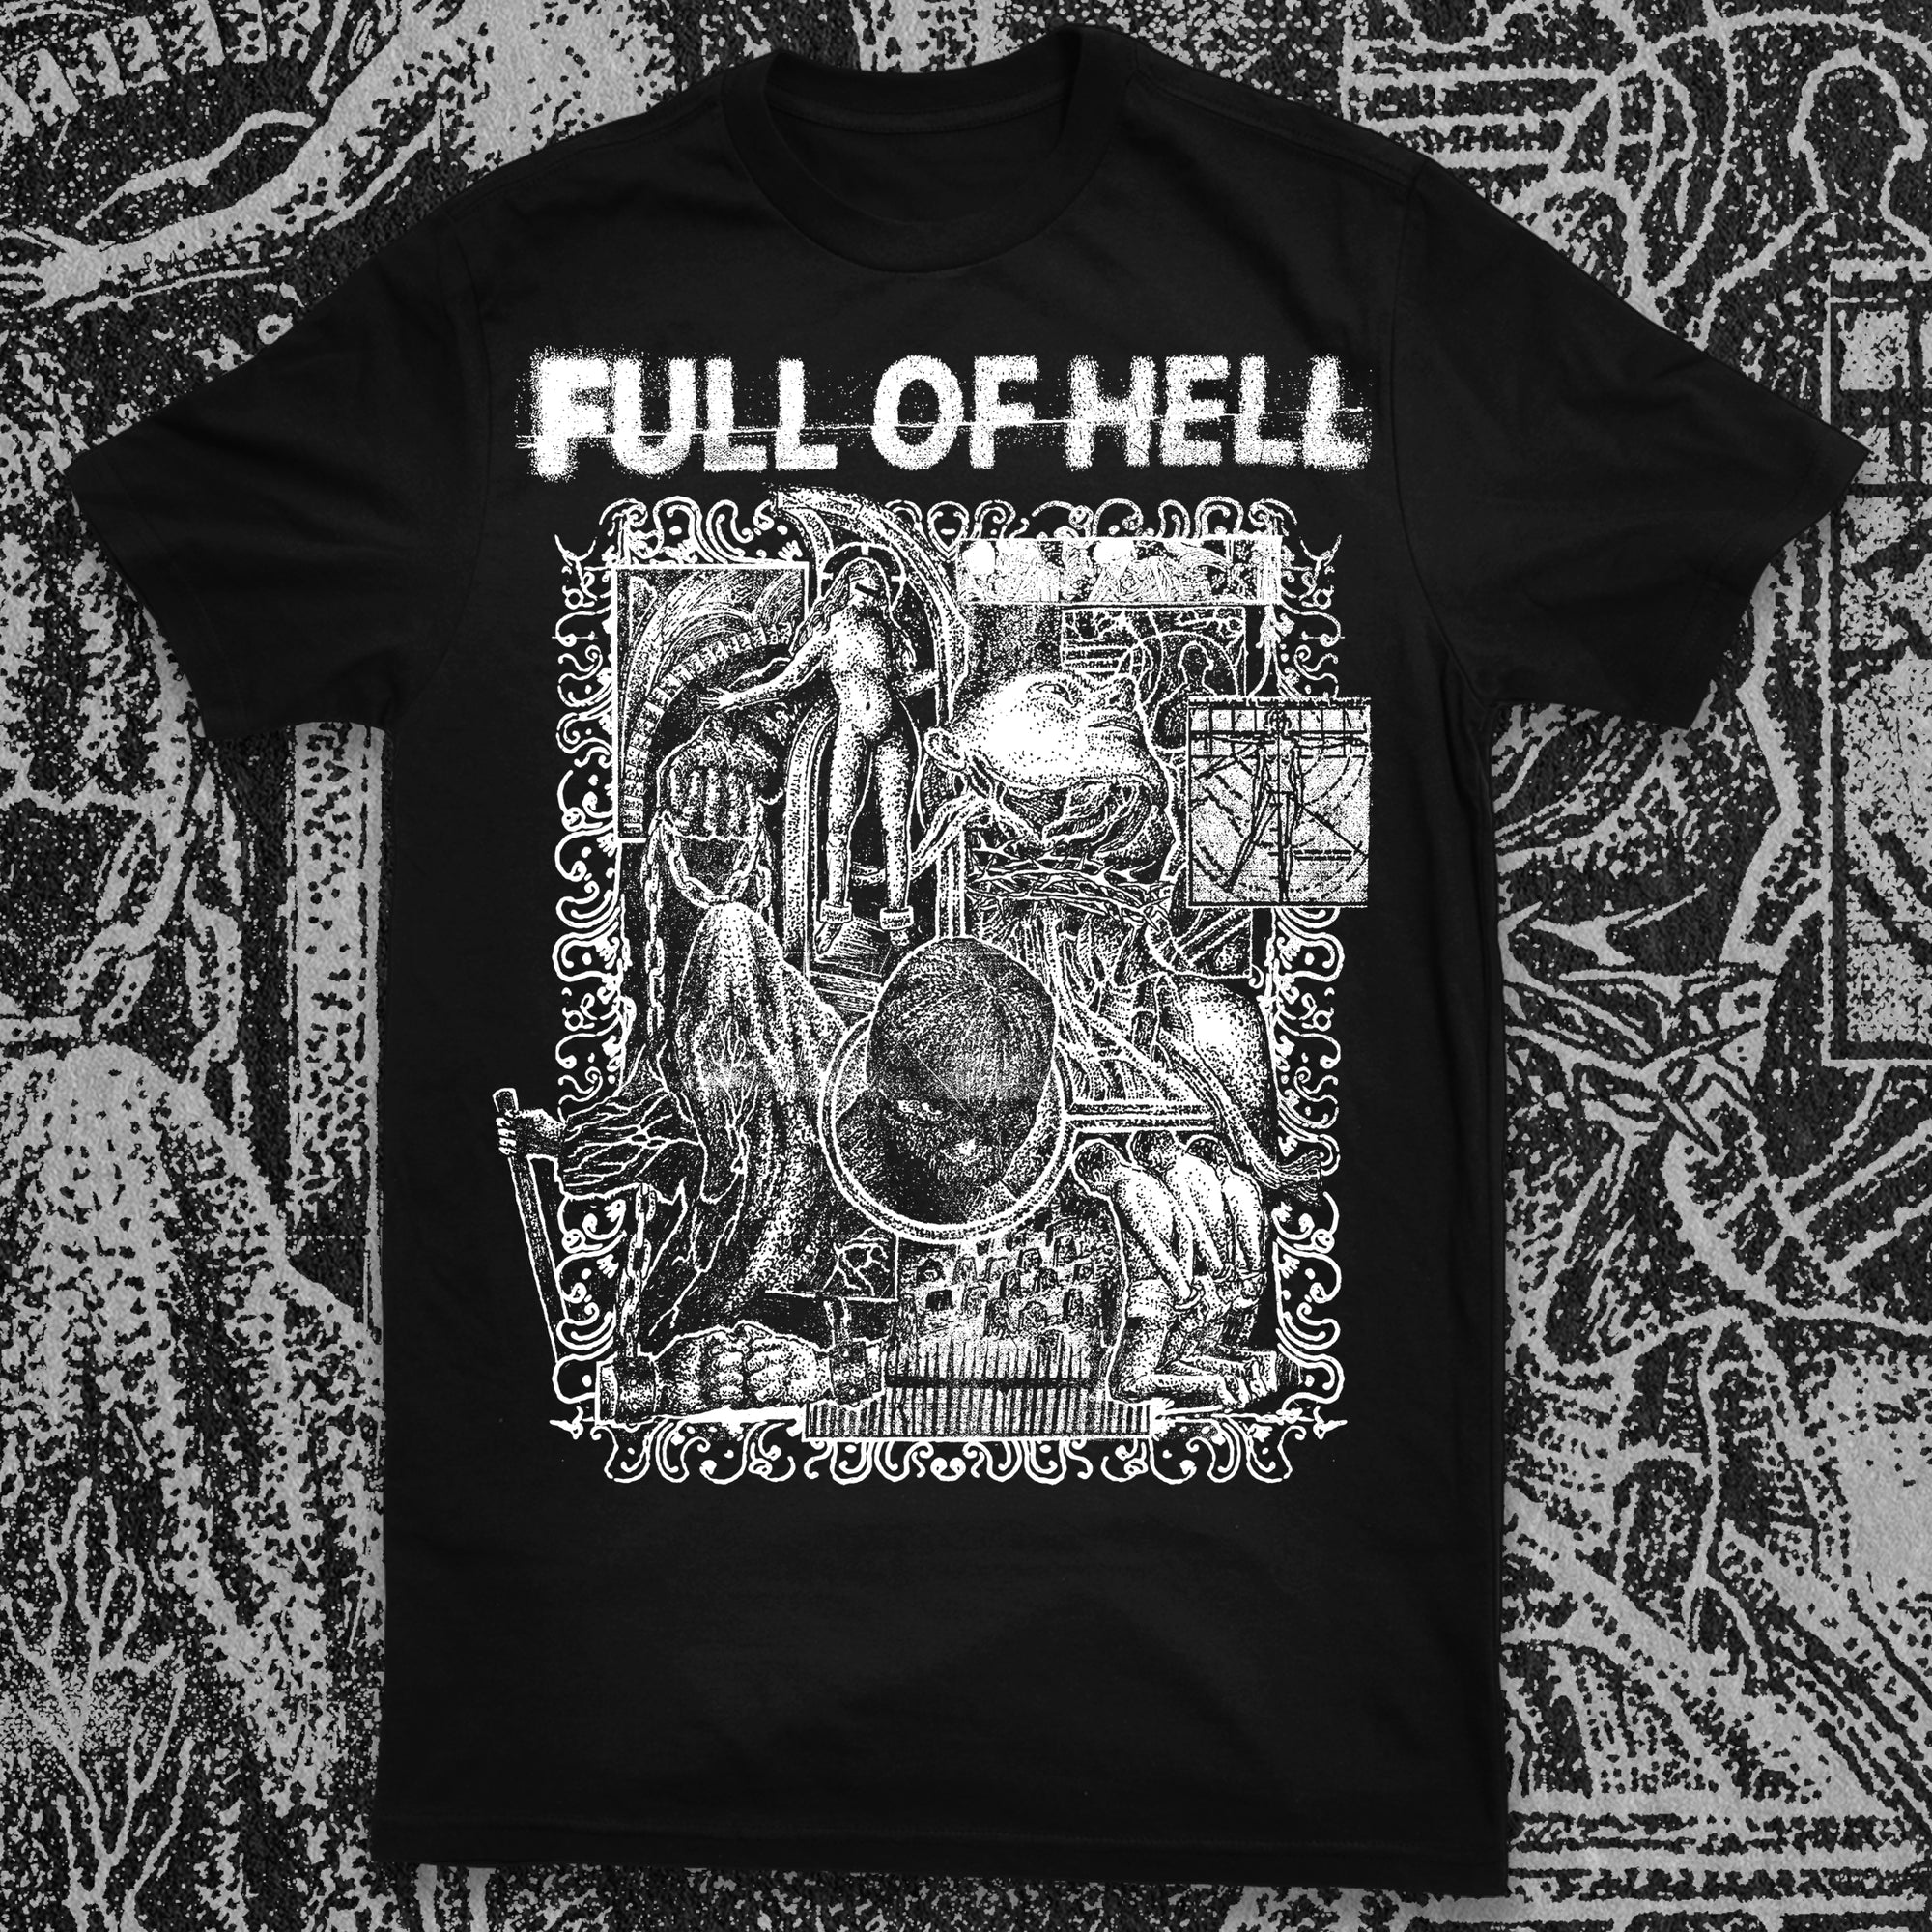 FULL OF HELL "NON ATOMISM" SHIRT